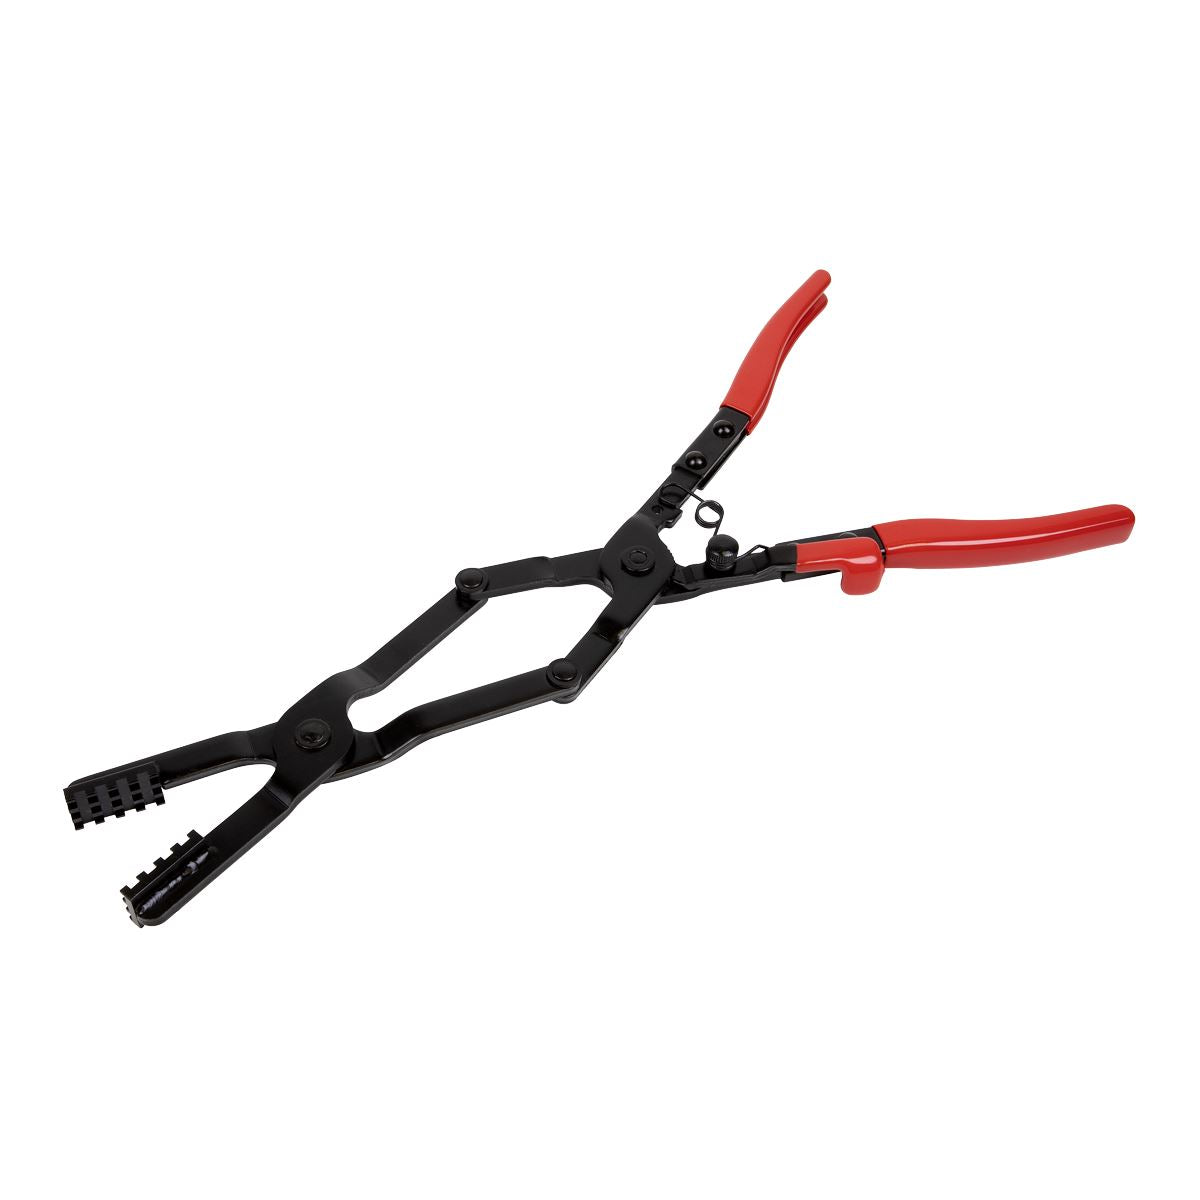 Sealey Hose Clip Pliers - 440mm Double-Jointed